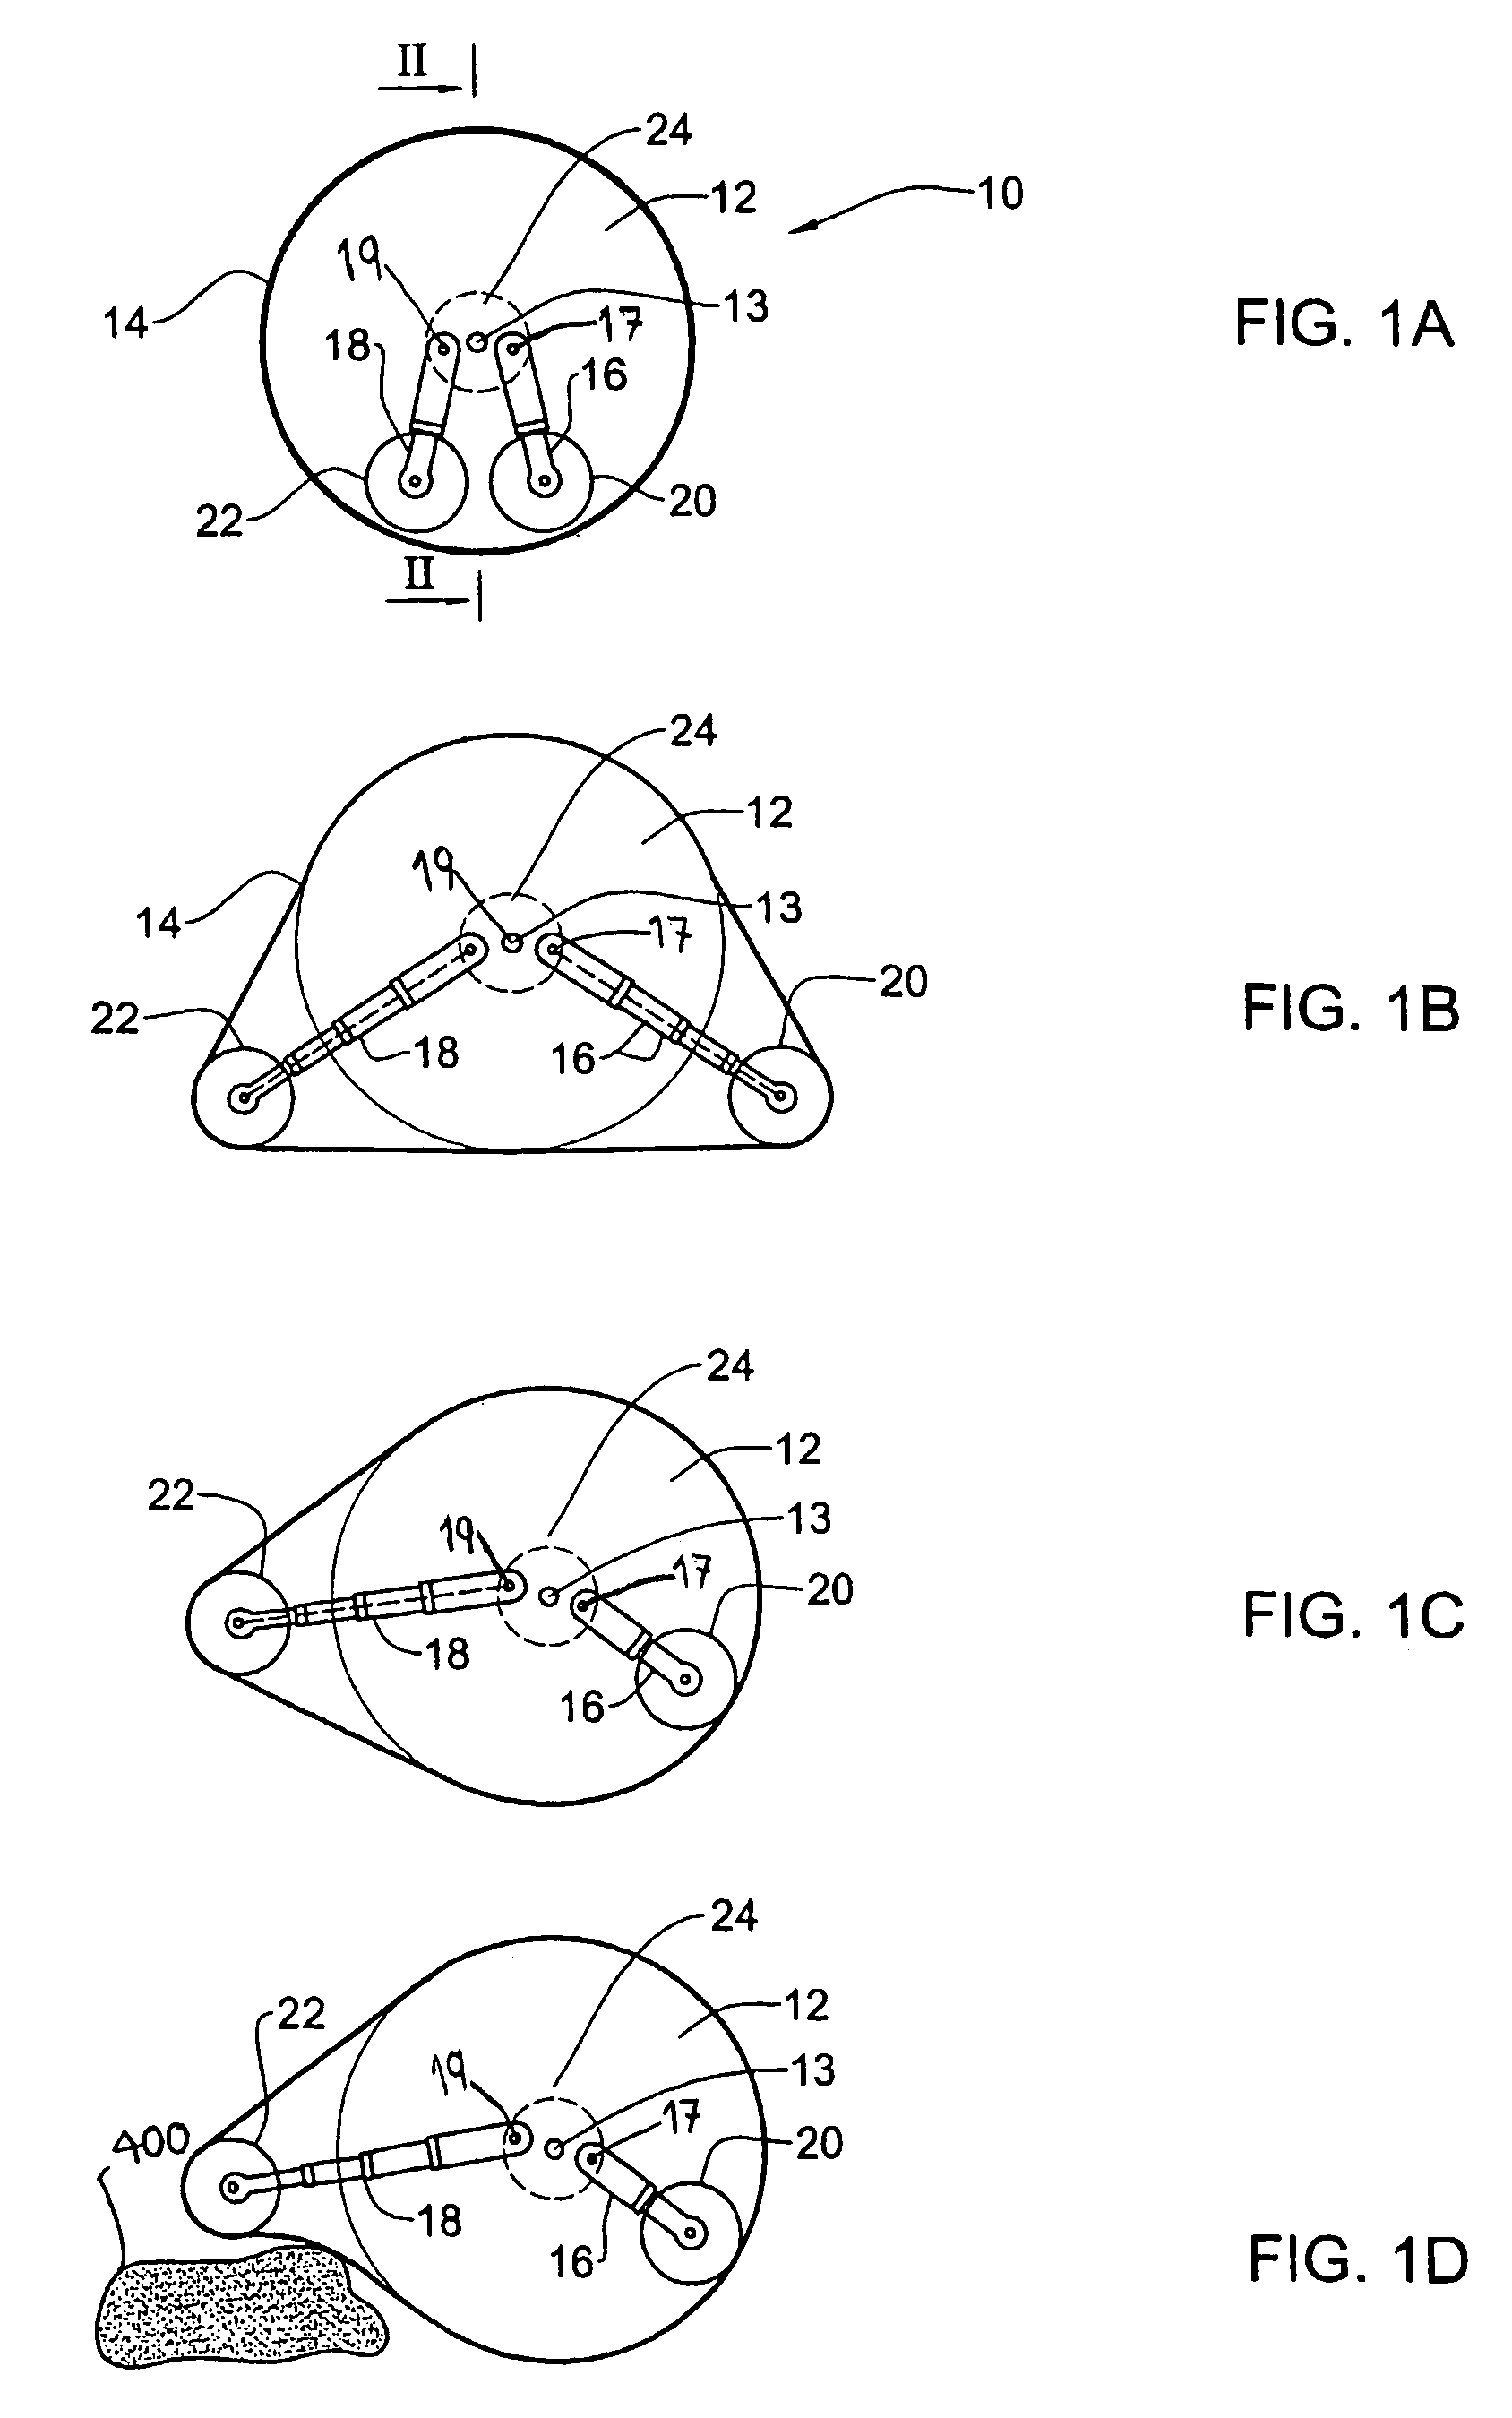 Adaptable traction system of a vehicle